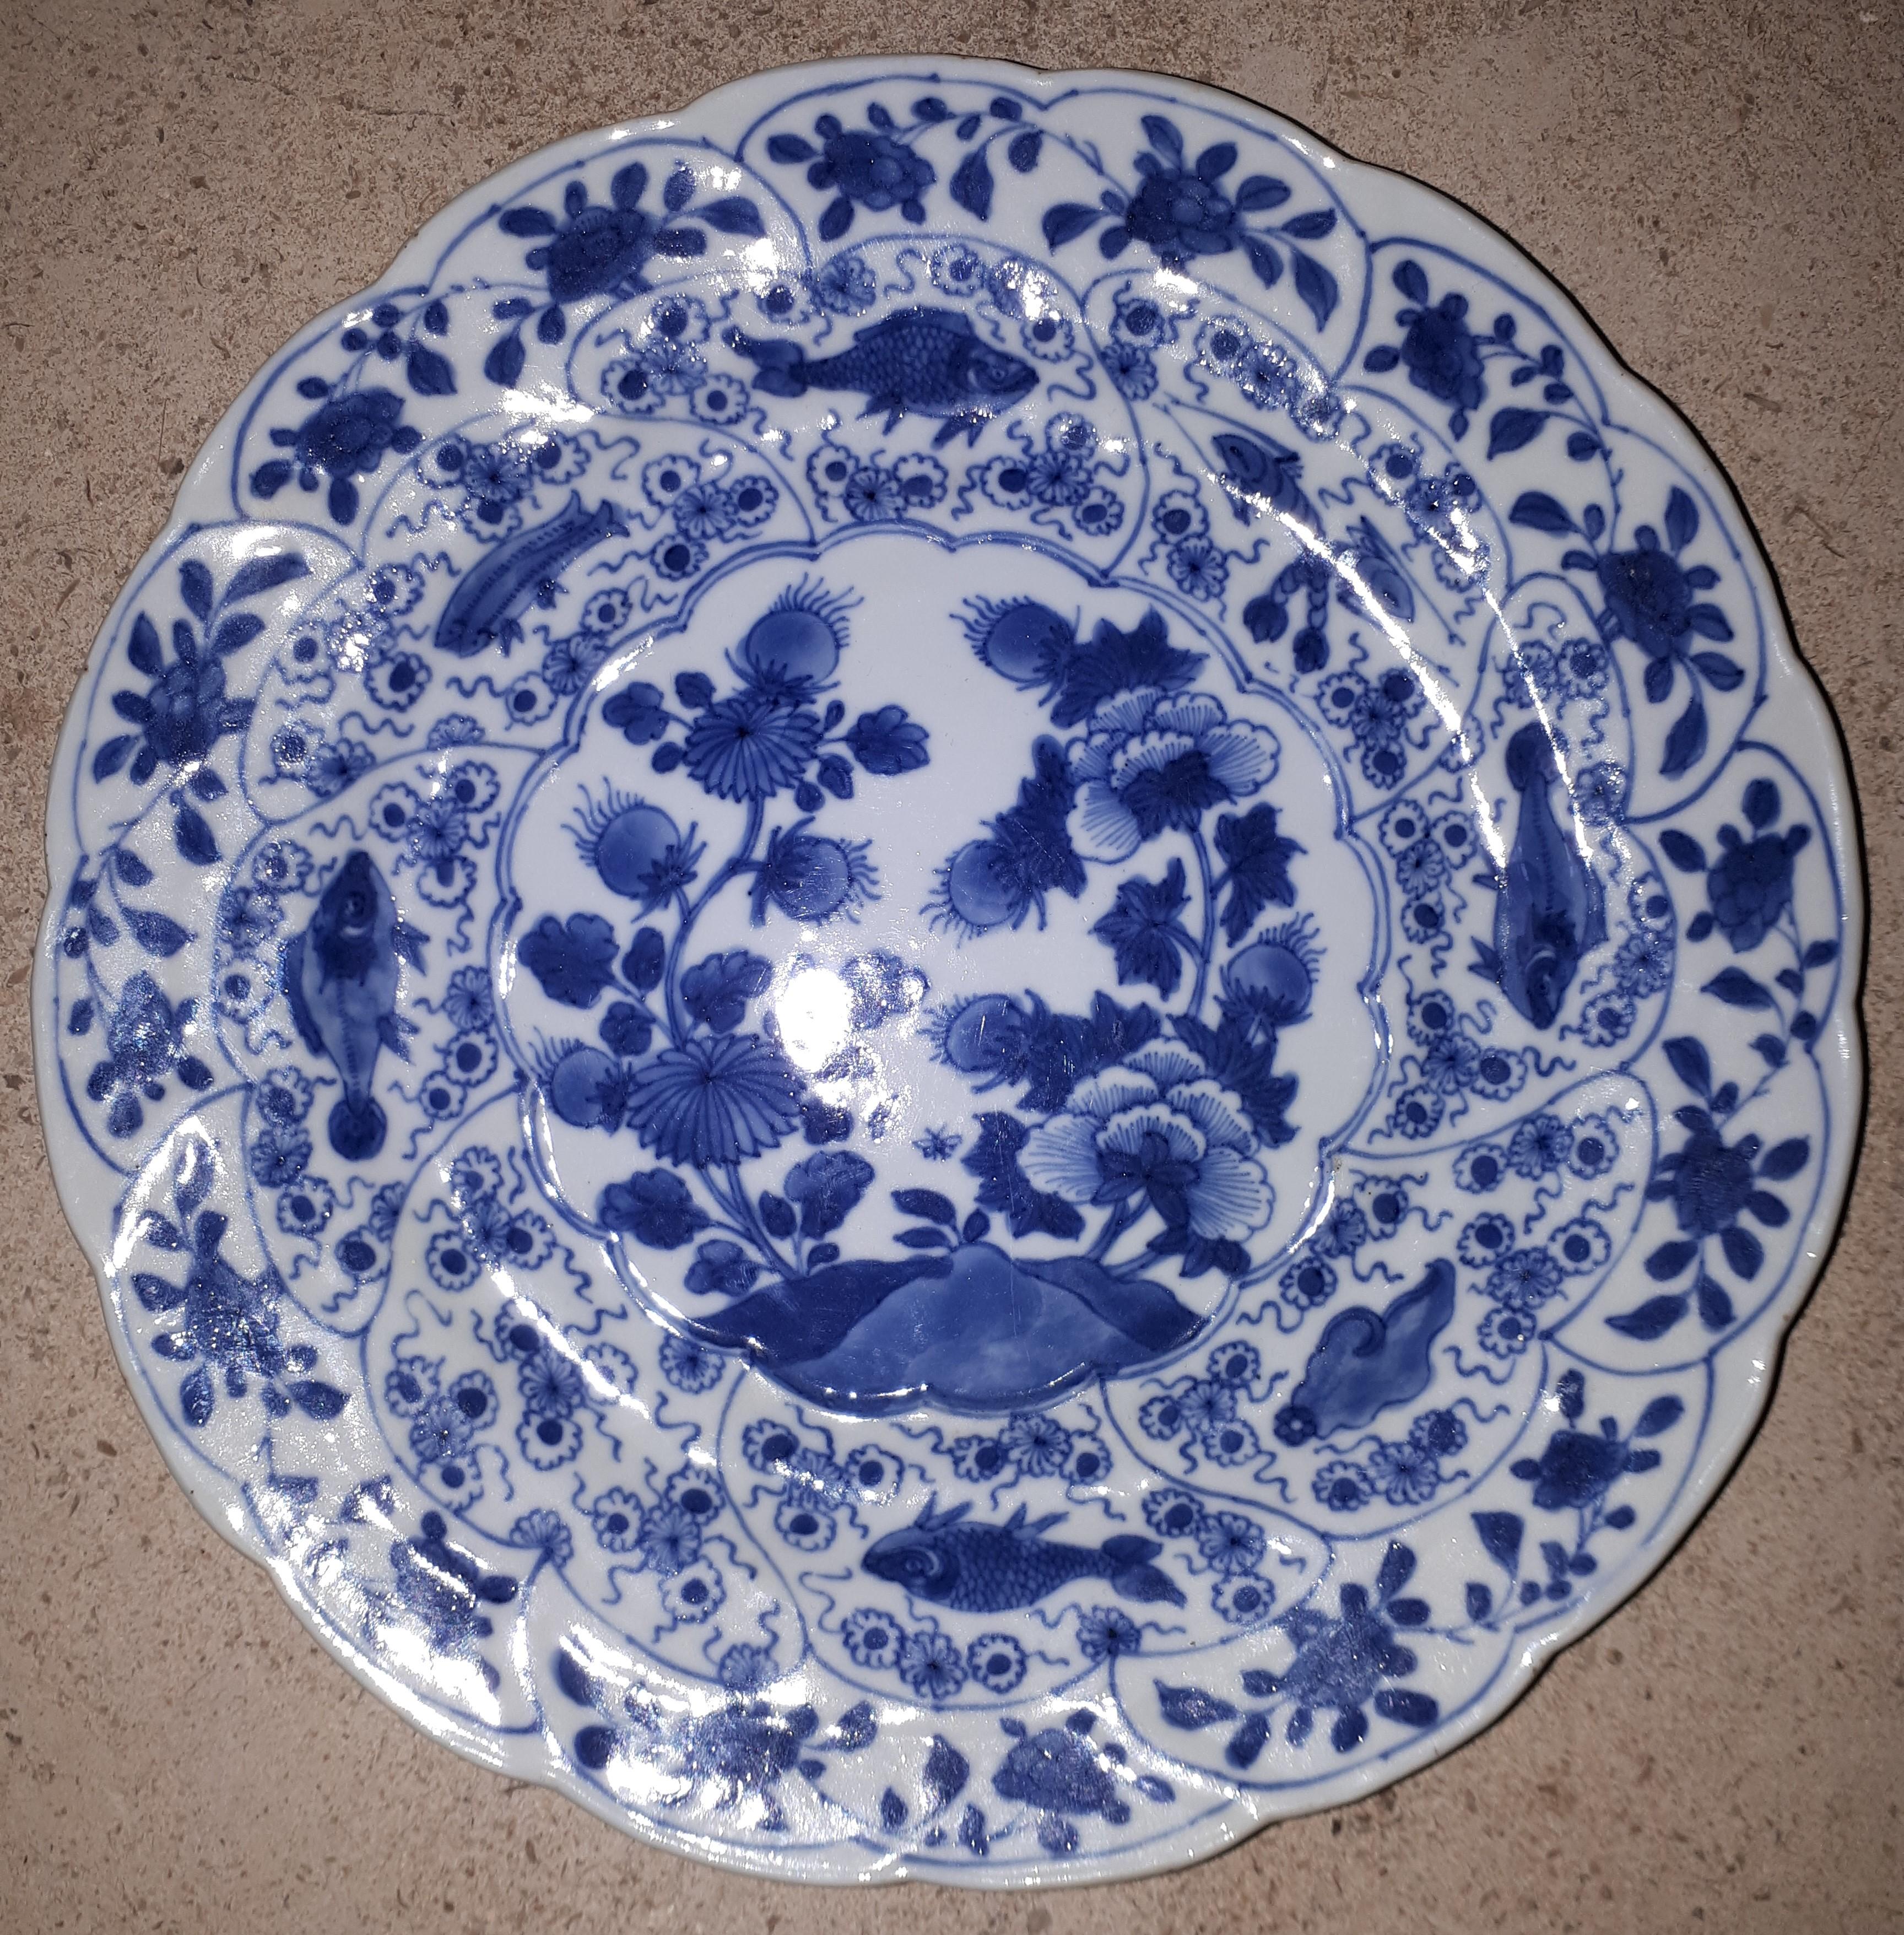 Rare porcelain plate with underglaze blue decoration of peonies, the wing decorated with crustaceans, fish and flowers in reserves.
China, late 17th century.